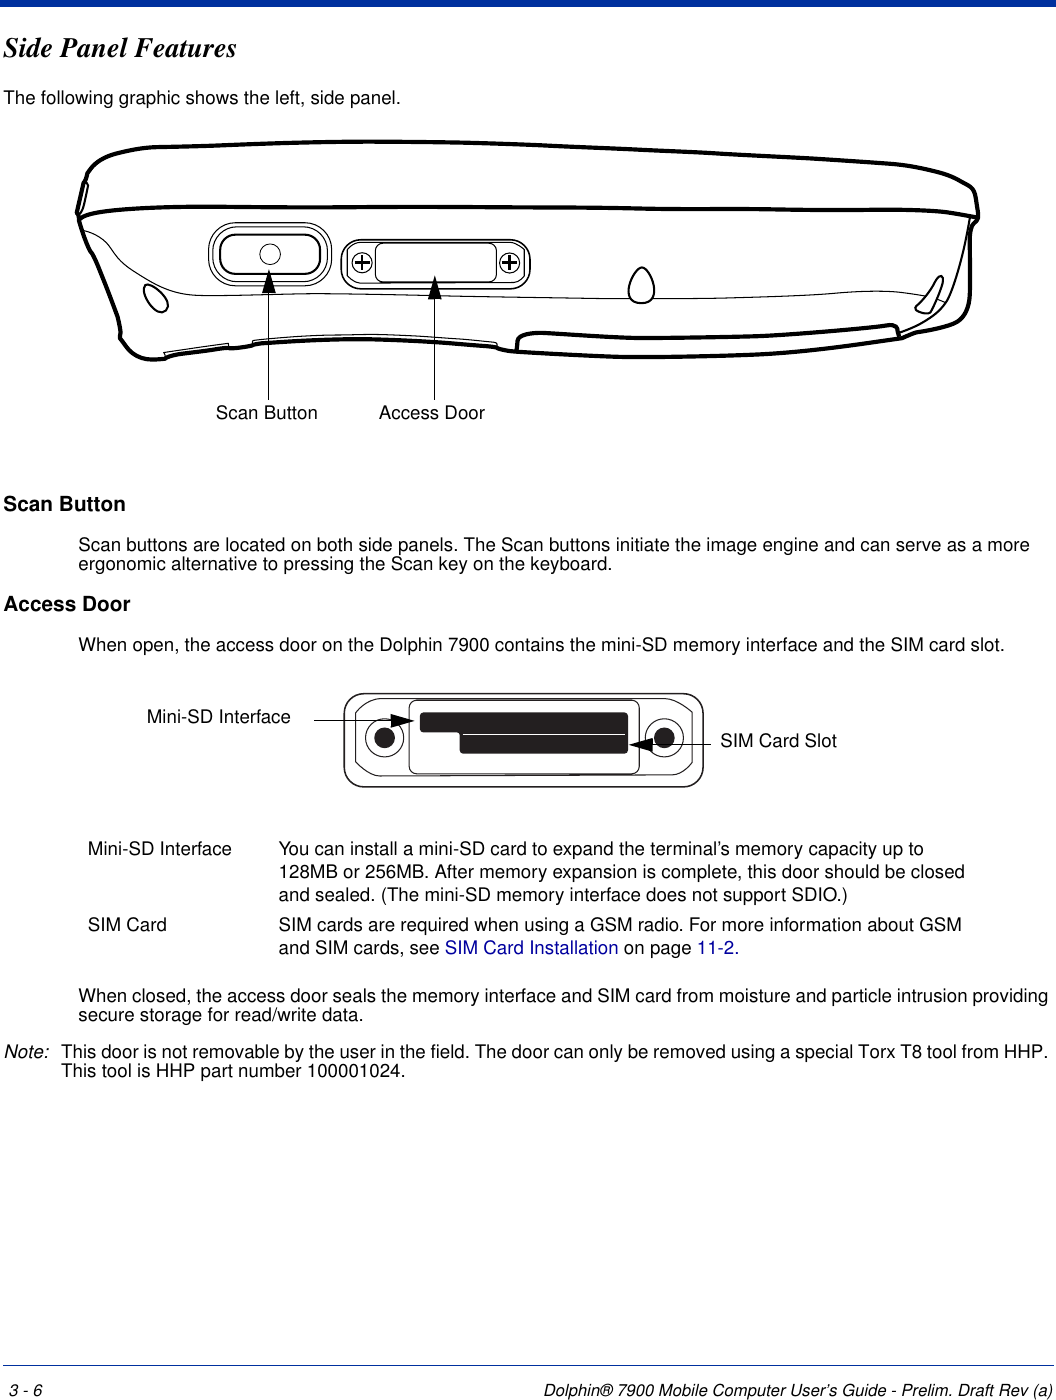 3 - 6 Dolphin® 7900 Mobile Computer User’s Guide - Prelim. Draft Rev (a)Side Panel FeaturesThe following graphic shows the left, side panel.Scan Button Scan buttons are located on both side panels. The Scan buttons initiate the image engine and can serve as a more ergonomic alternative to pressing the Scan key on the keyboard.Access Door When open, the access door on the Dolphin 7900 contains the mini-SD memory interface and the SIM card slot.When closed, the access door seals the memory interface and SIM card from moisture and particle intrusion providing secure storage for read/write data. Note: This door is not removable by the user in the field. The door can only be removed using a special Torx T8 tool from HHP. This tool is HHP part number 100001024.Mini-SD Interface You can install a mini-SD card to expand the terminal’s memory capacity up to 128MB or 256MB. After memory expansion is complete, this door should be closed and sealed. (The mini-SD memory interface does not support SDIO.)SIM Card  SIM cards are required when using a GSM radio. For more information about GSM and SIM cards, see SIM Card Installation on page 11-2.Scan Button Access DoorMini-SD InterfaceSIM Card Slot